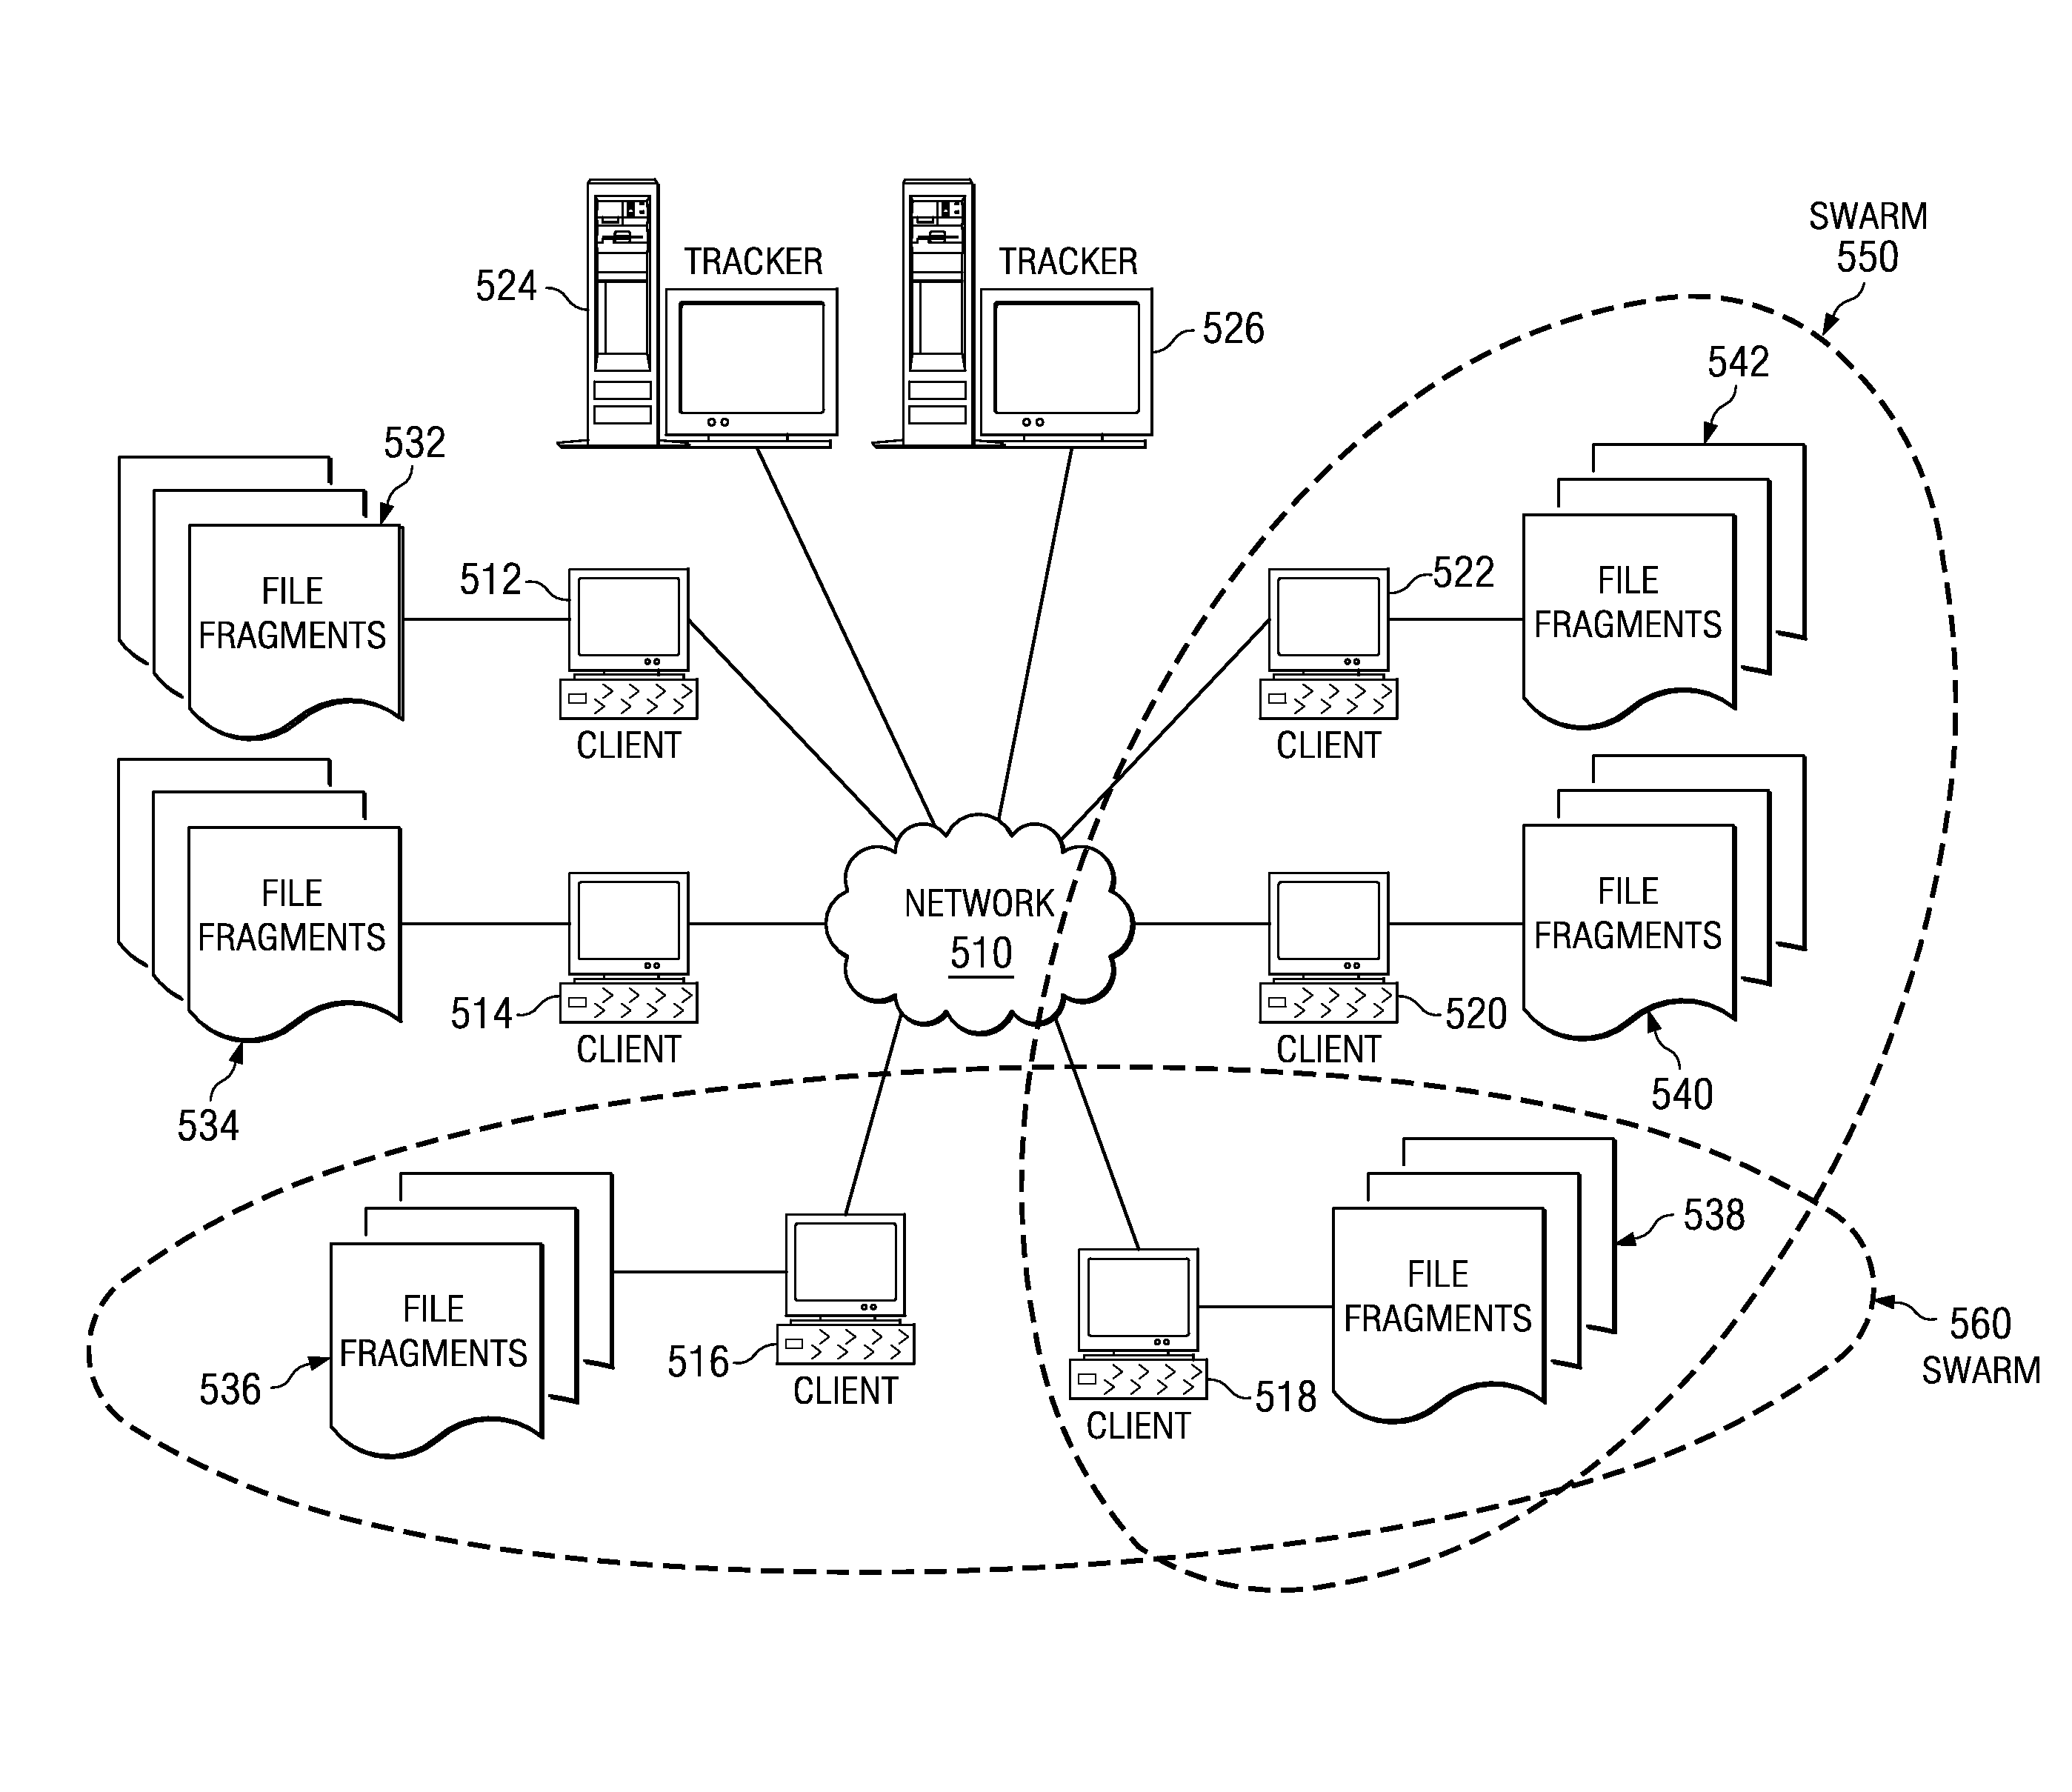 Mapping file fragments to file information and tagging in a segmented file sharing system